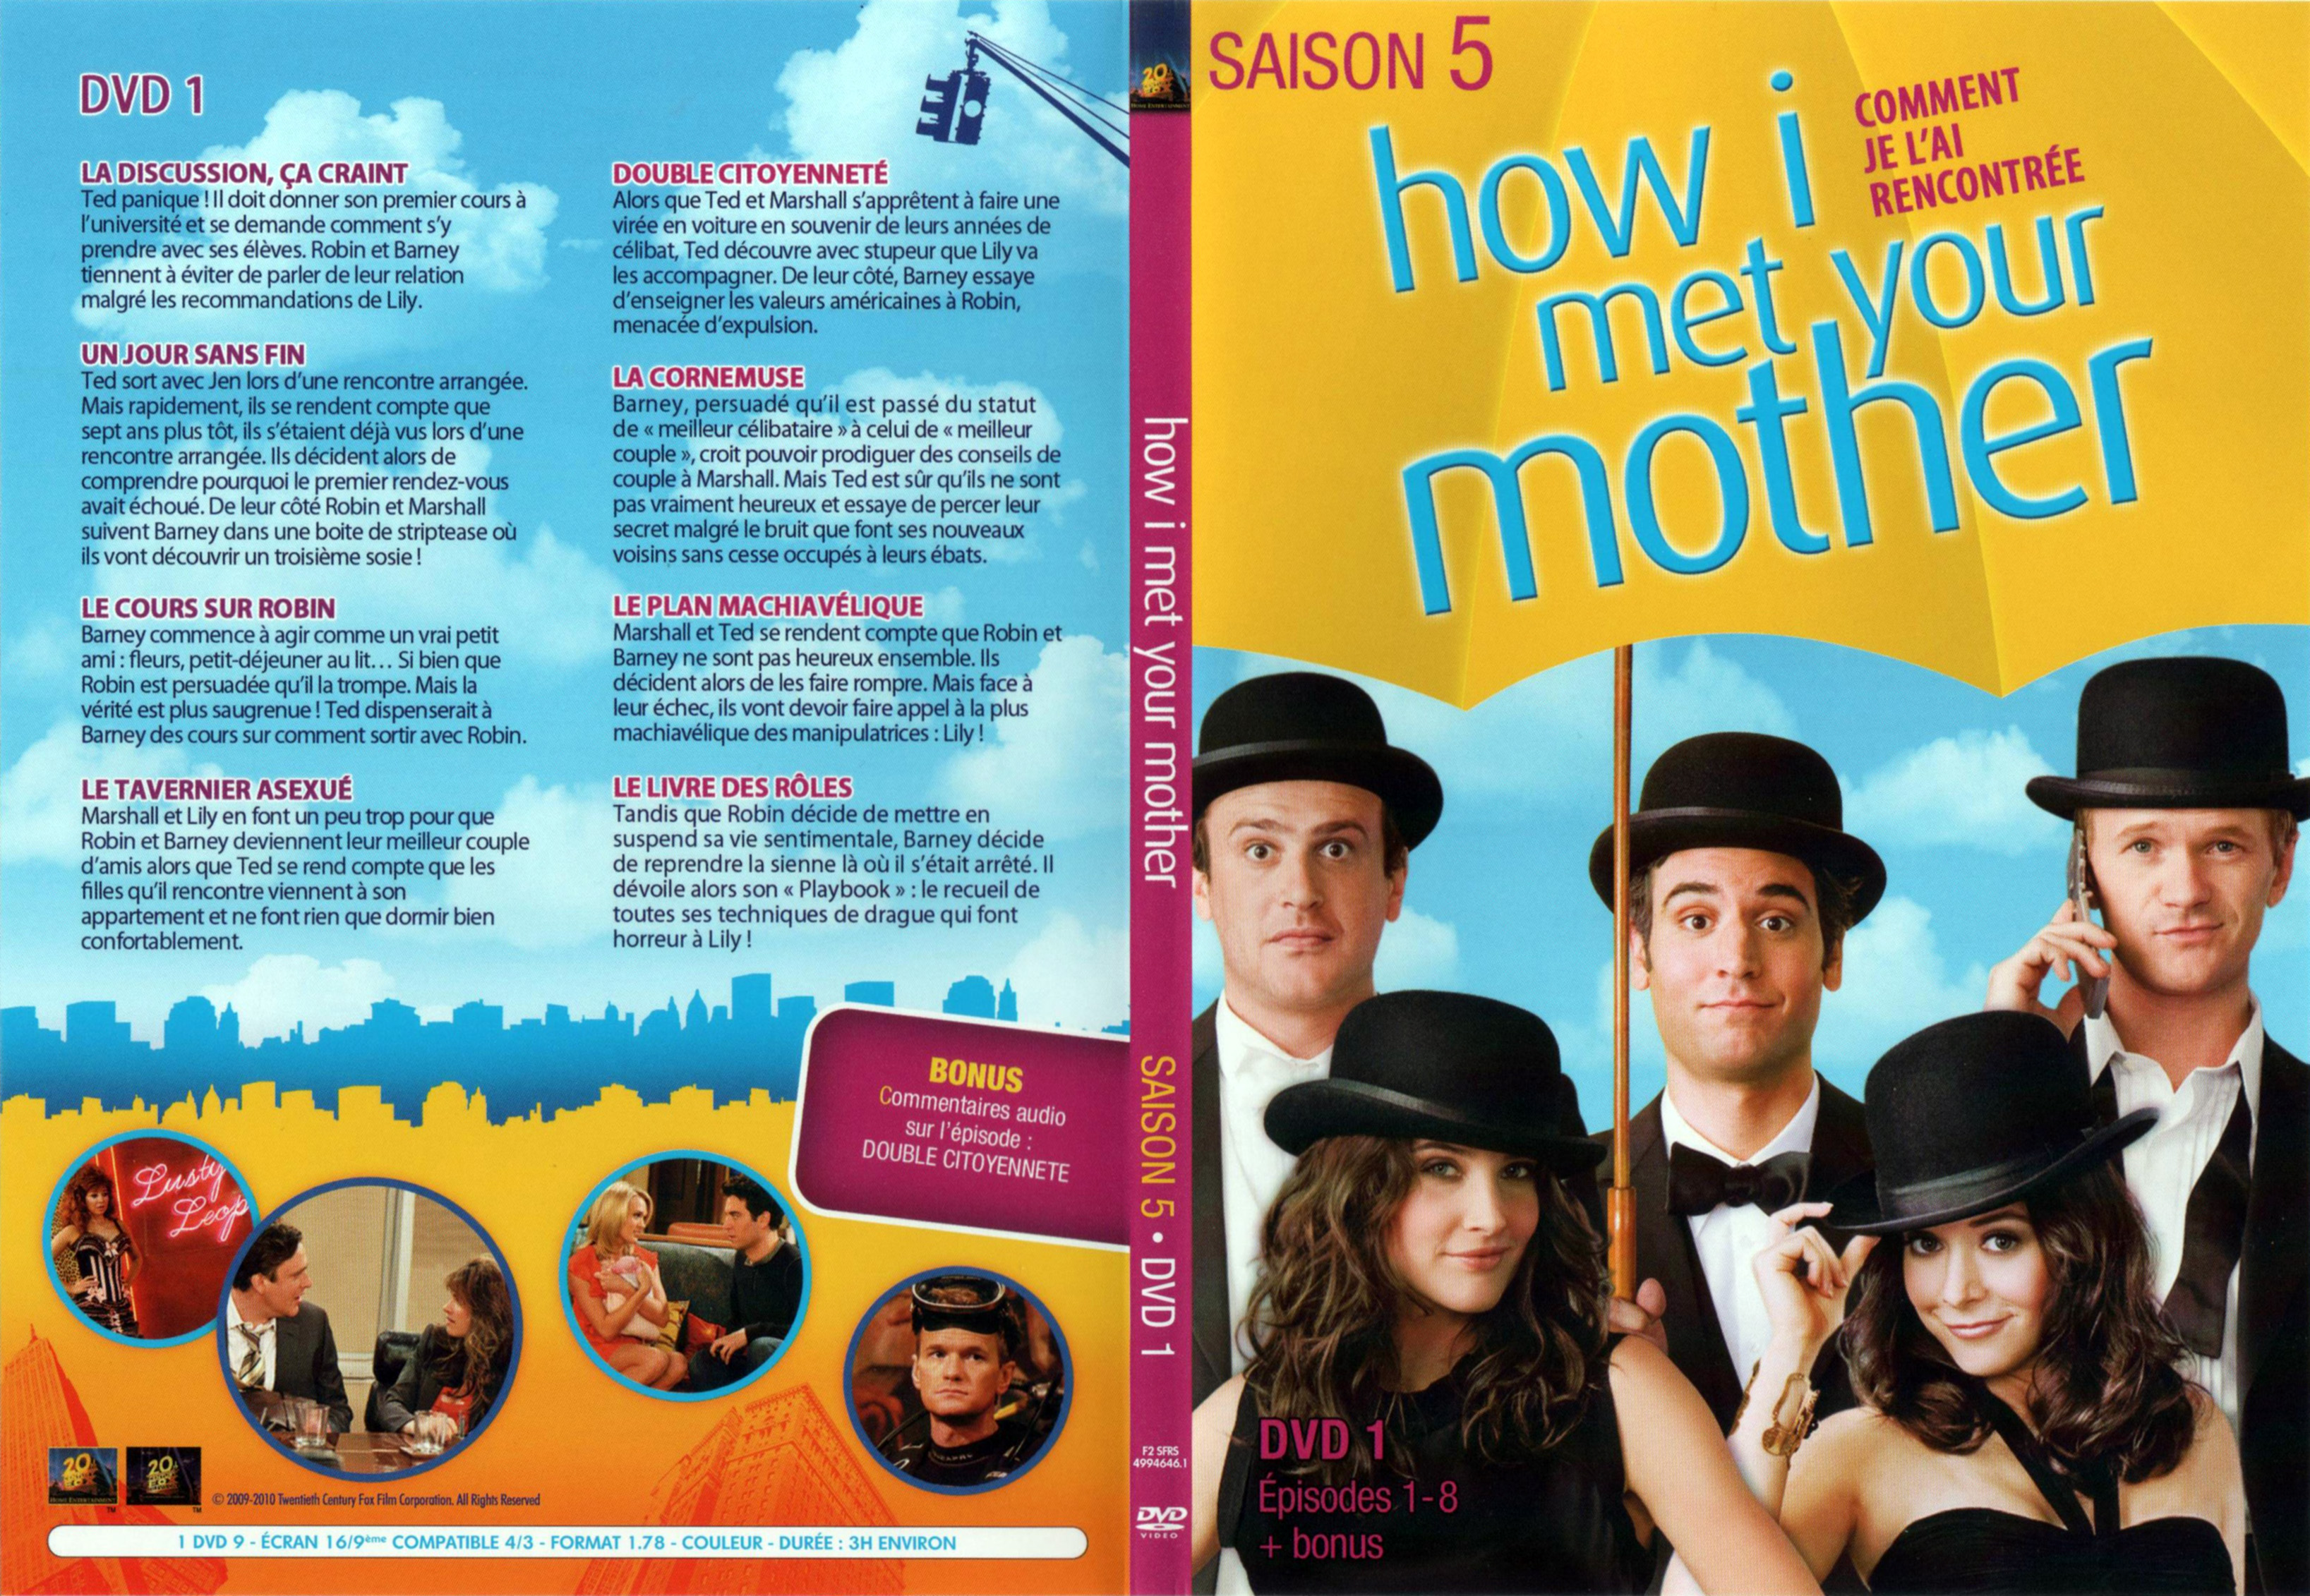 Jaquette DVD How i met your mother Saison 5 DVD 1